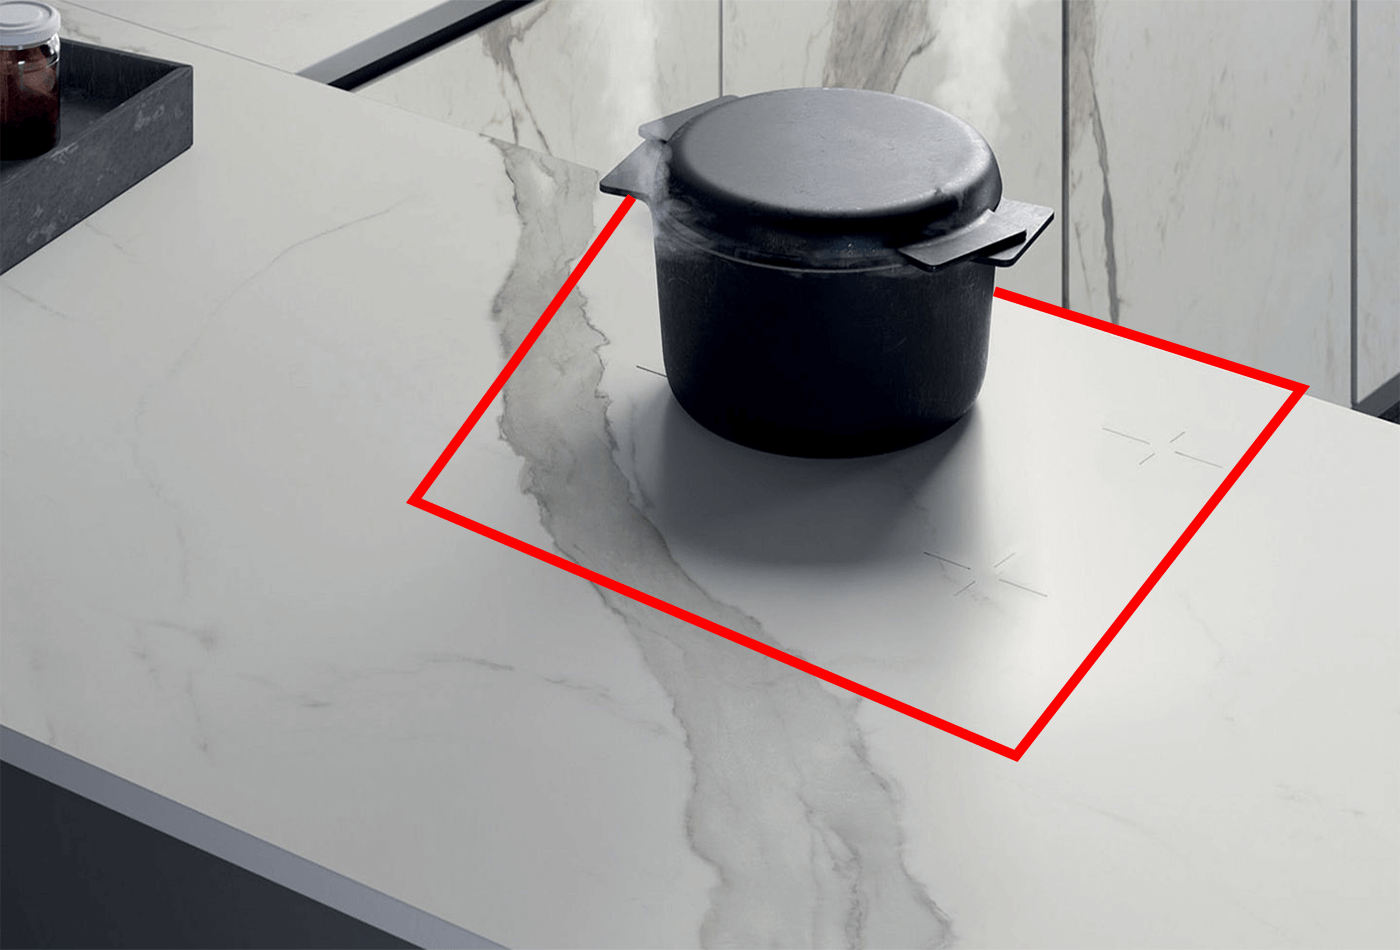 Invisible Induction Cooktop Surfaces - Having Trouble Locating the Cooking Point